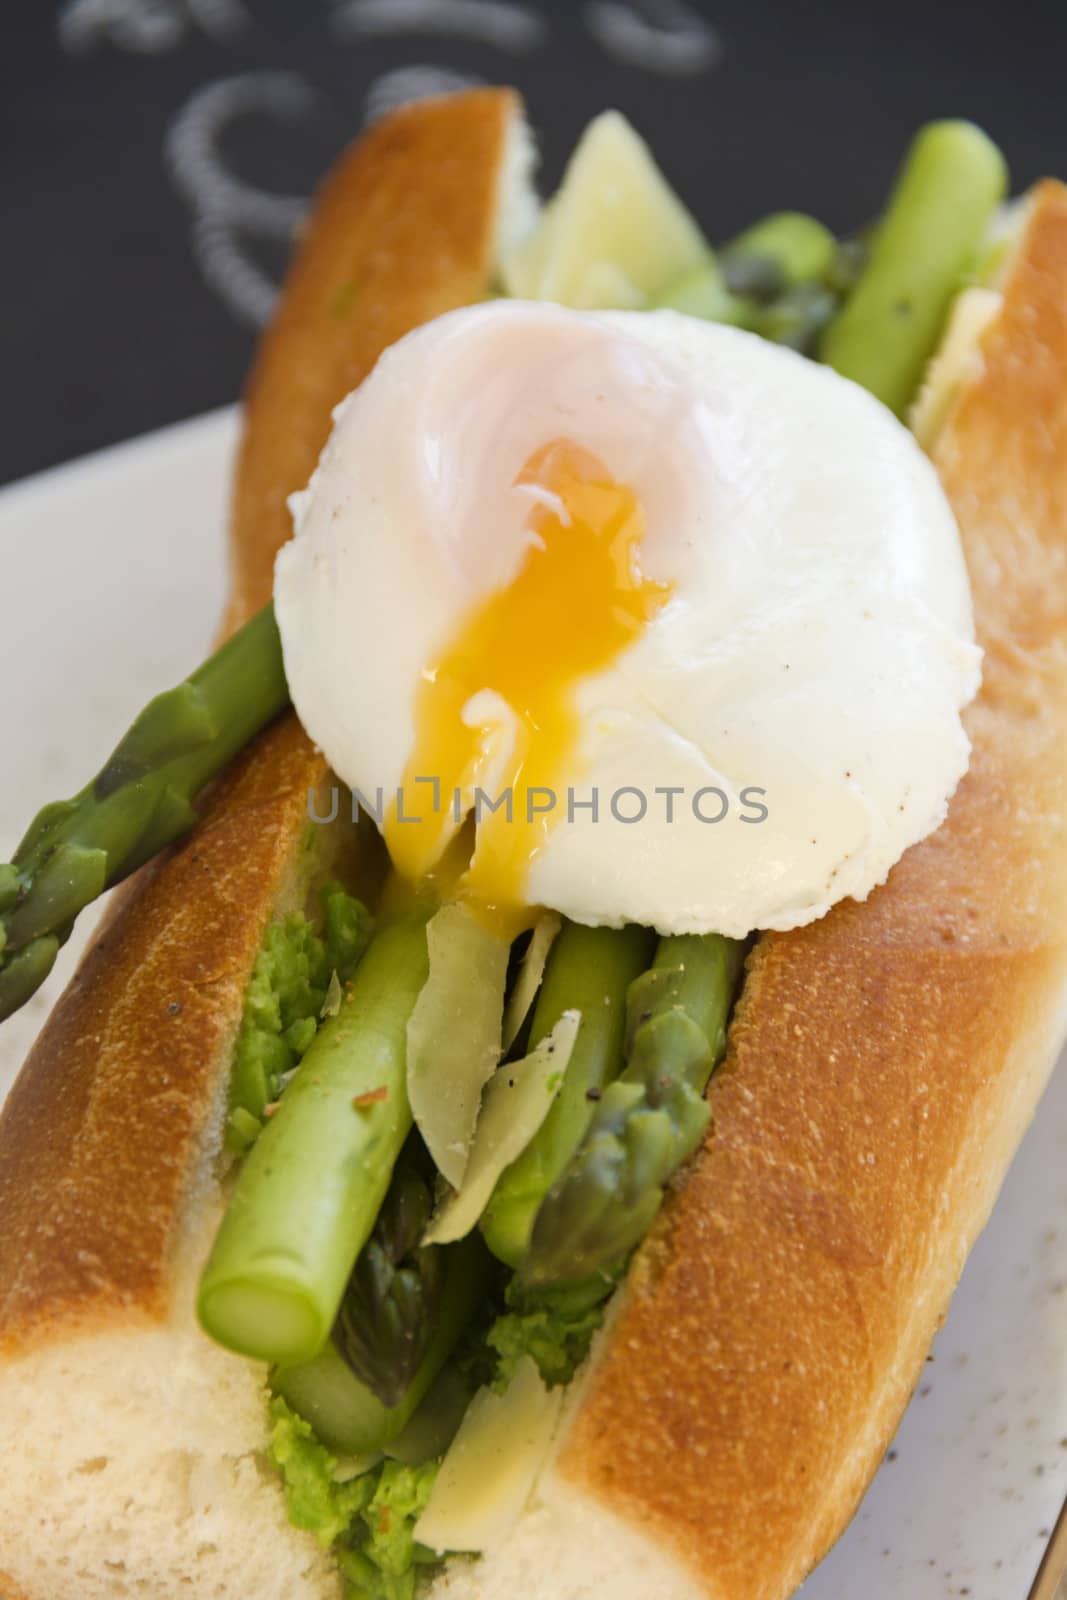 Delicious asparagus and mashed peas topped with a poached runny egg on a crispy baguette.